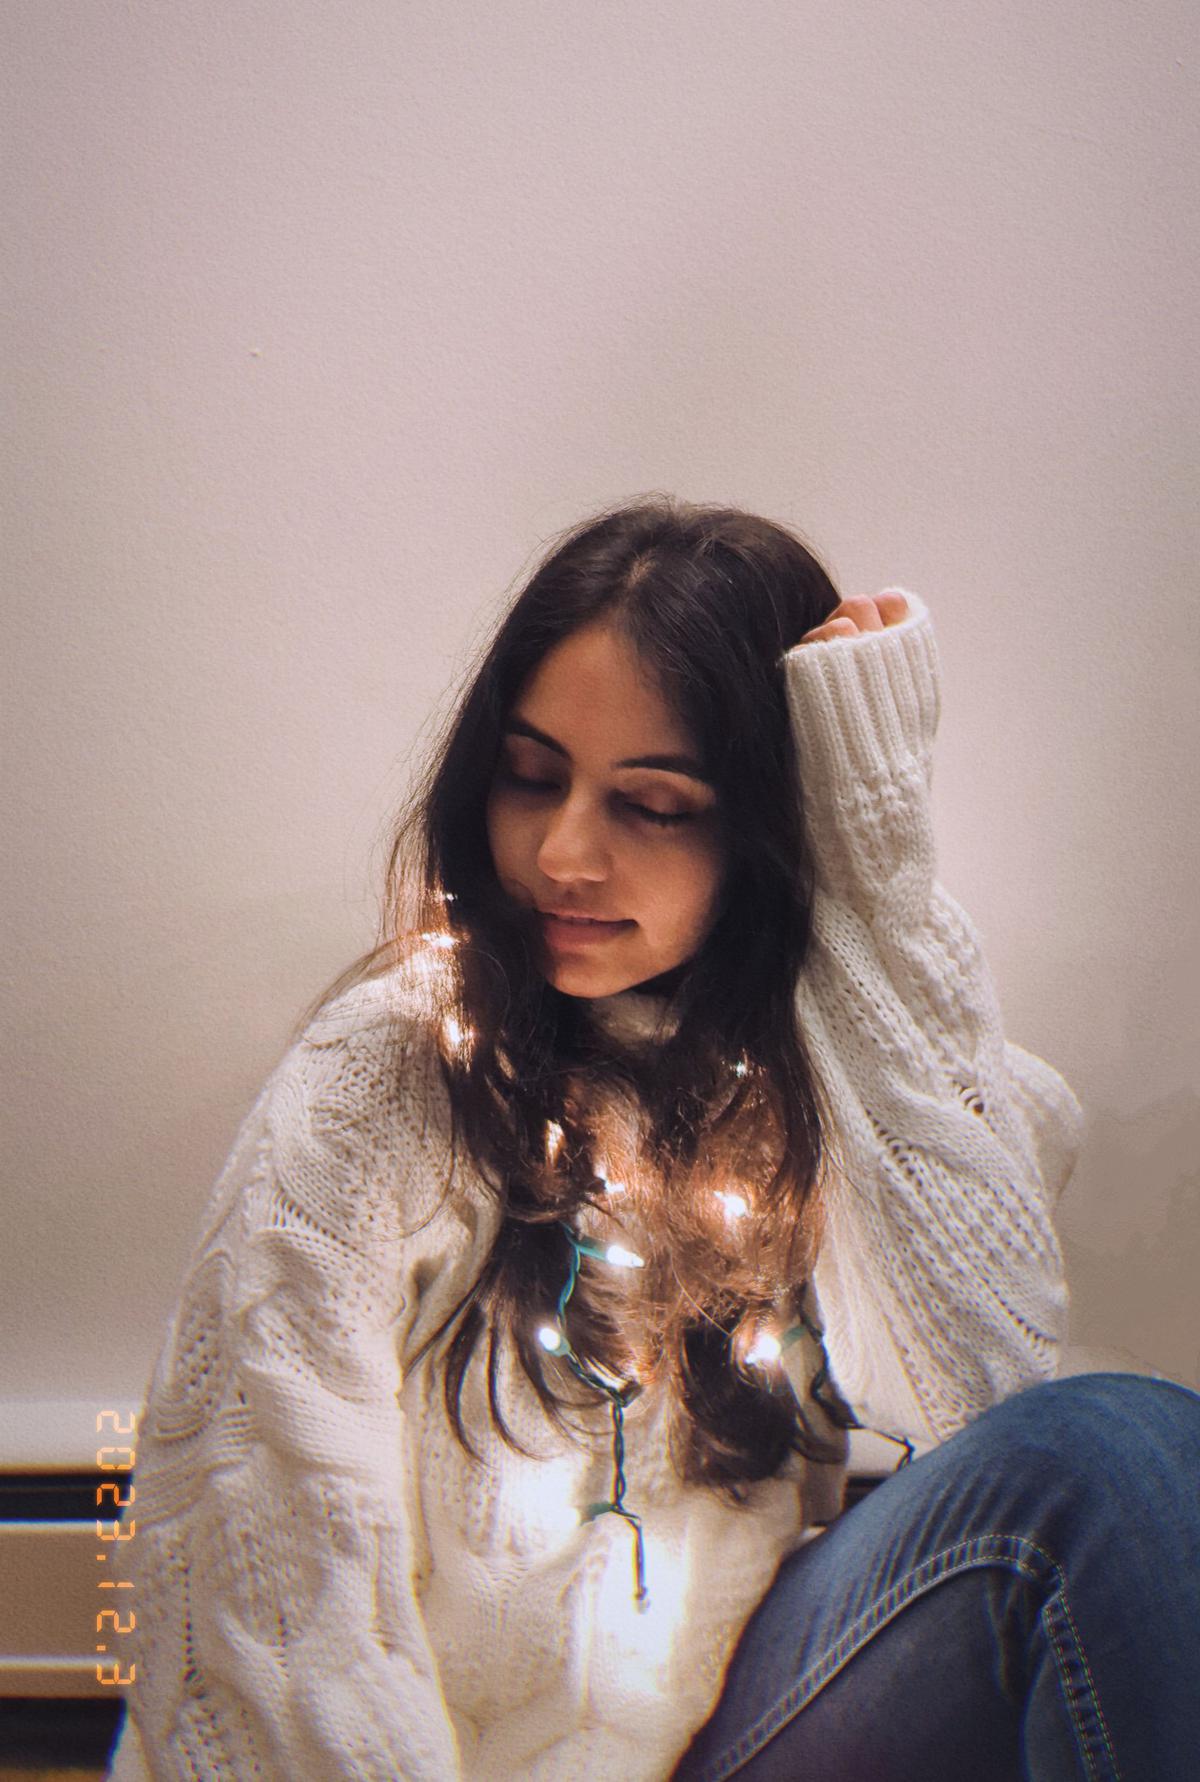 Piya Podder’s first official Christmas song